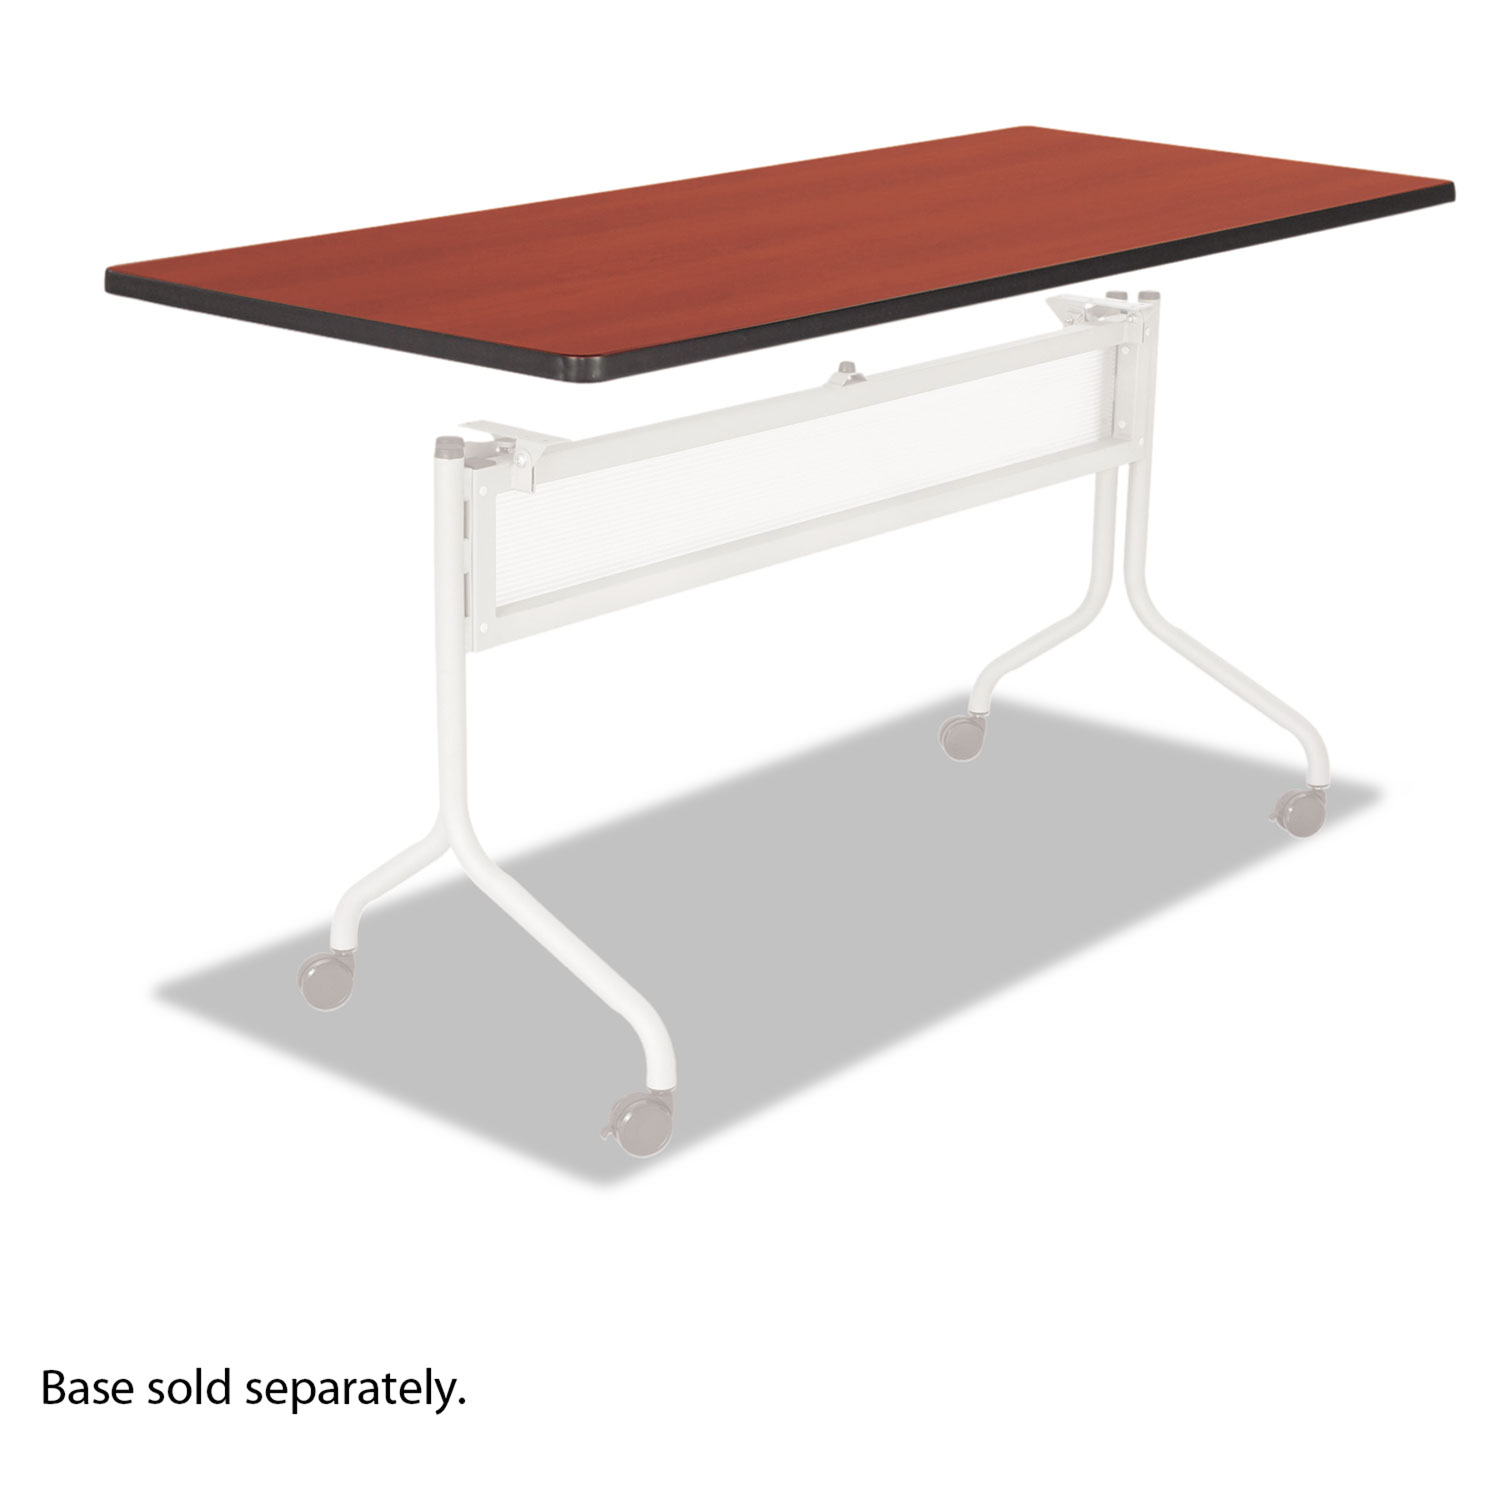 Safco SAF2067CY Impromptu Series Mobile Training Table Top, Rectangular, 72w x 24d, Cherry